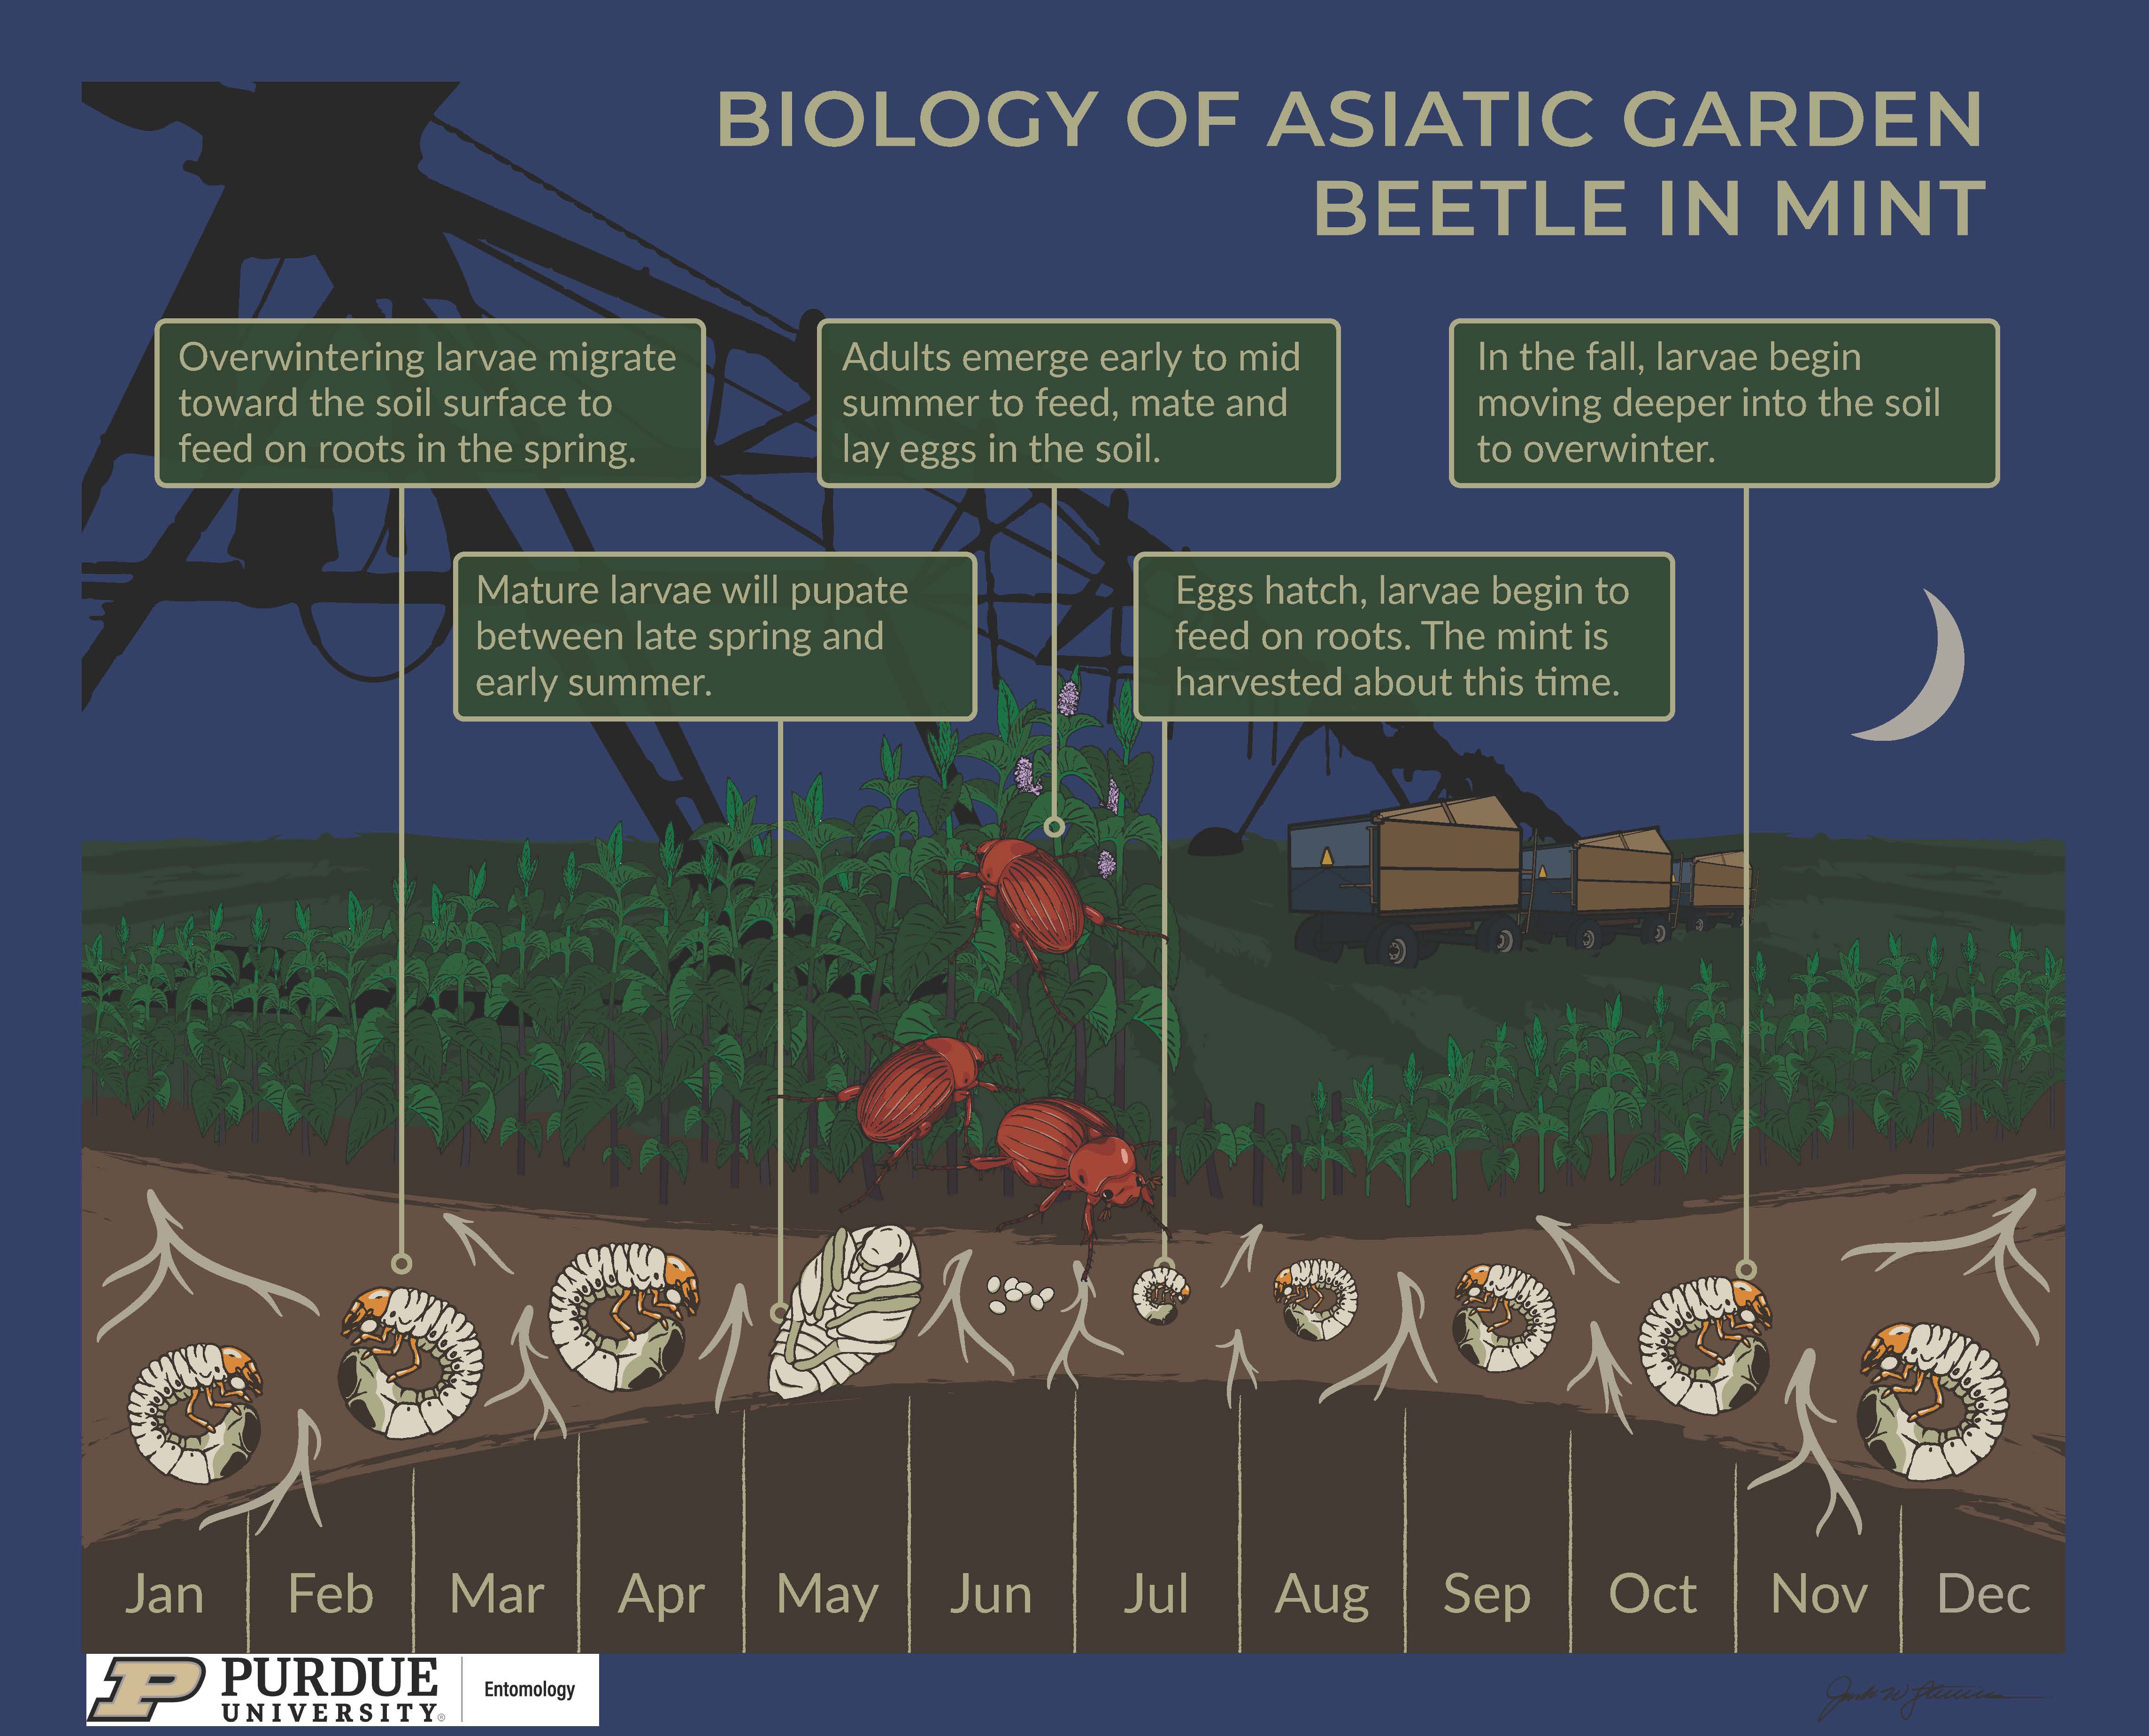 Biology of Asiatic Garden Beetle in Mint Infographic